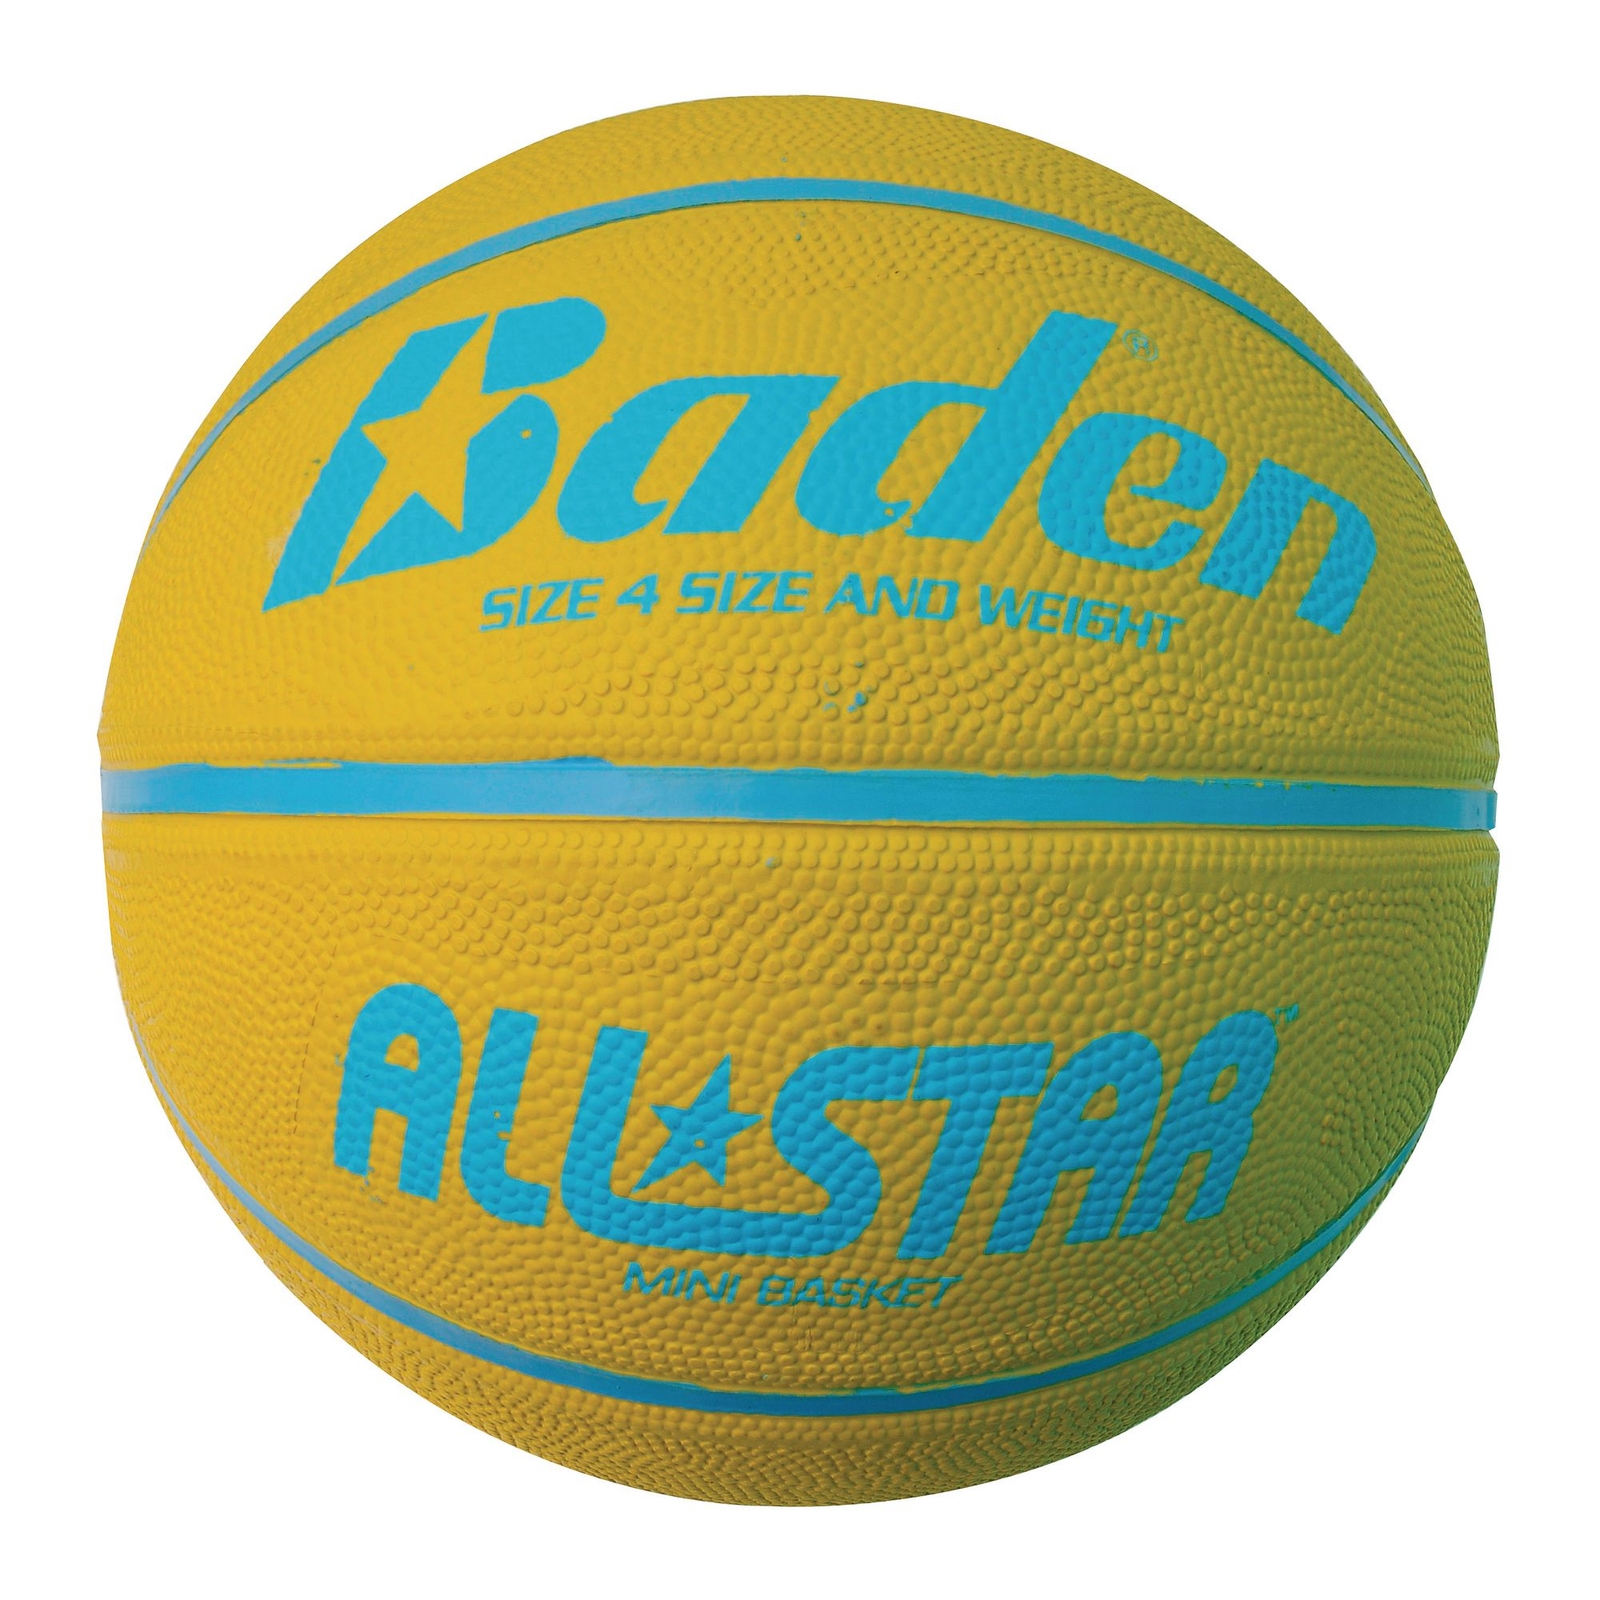 Baden All Star Basketball - Size 4 - Yellow/Blue